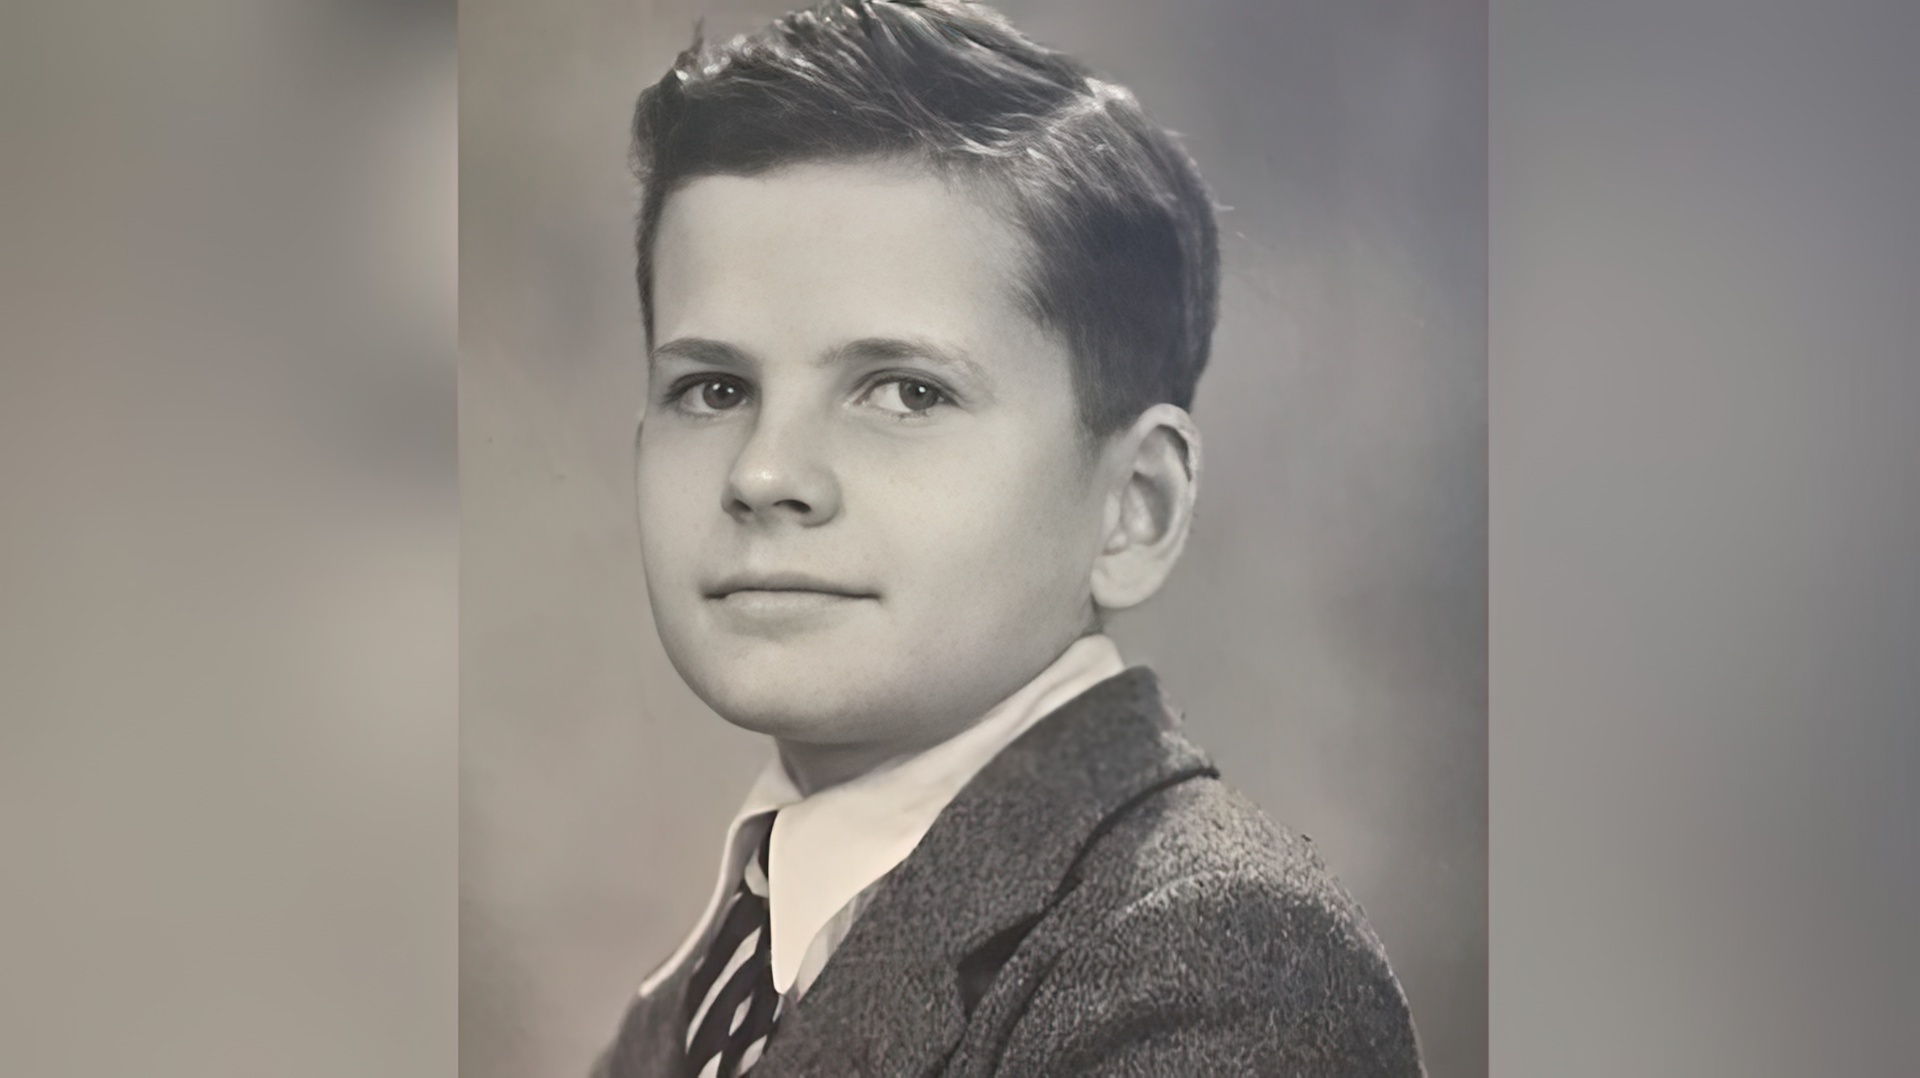 Ian Holm as a child